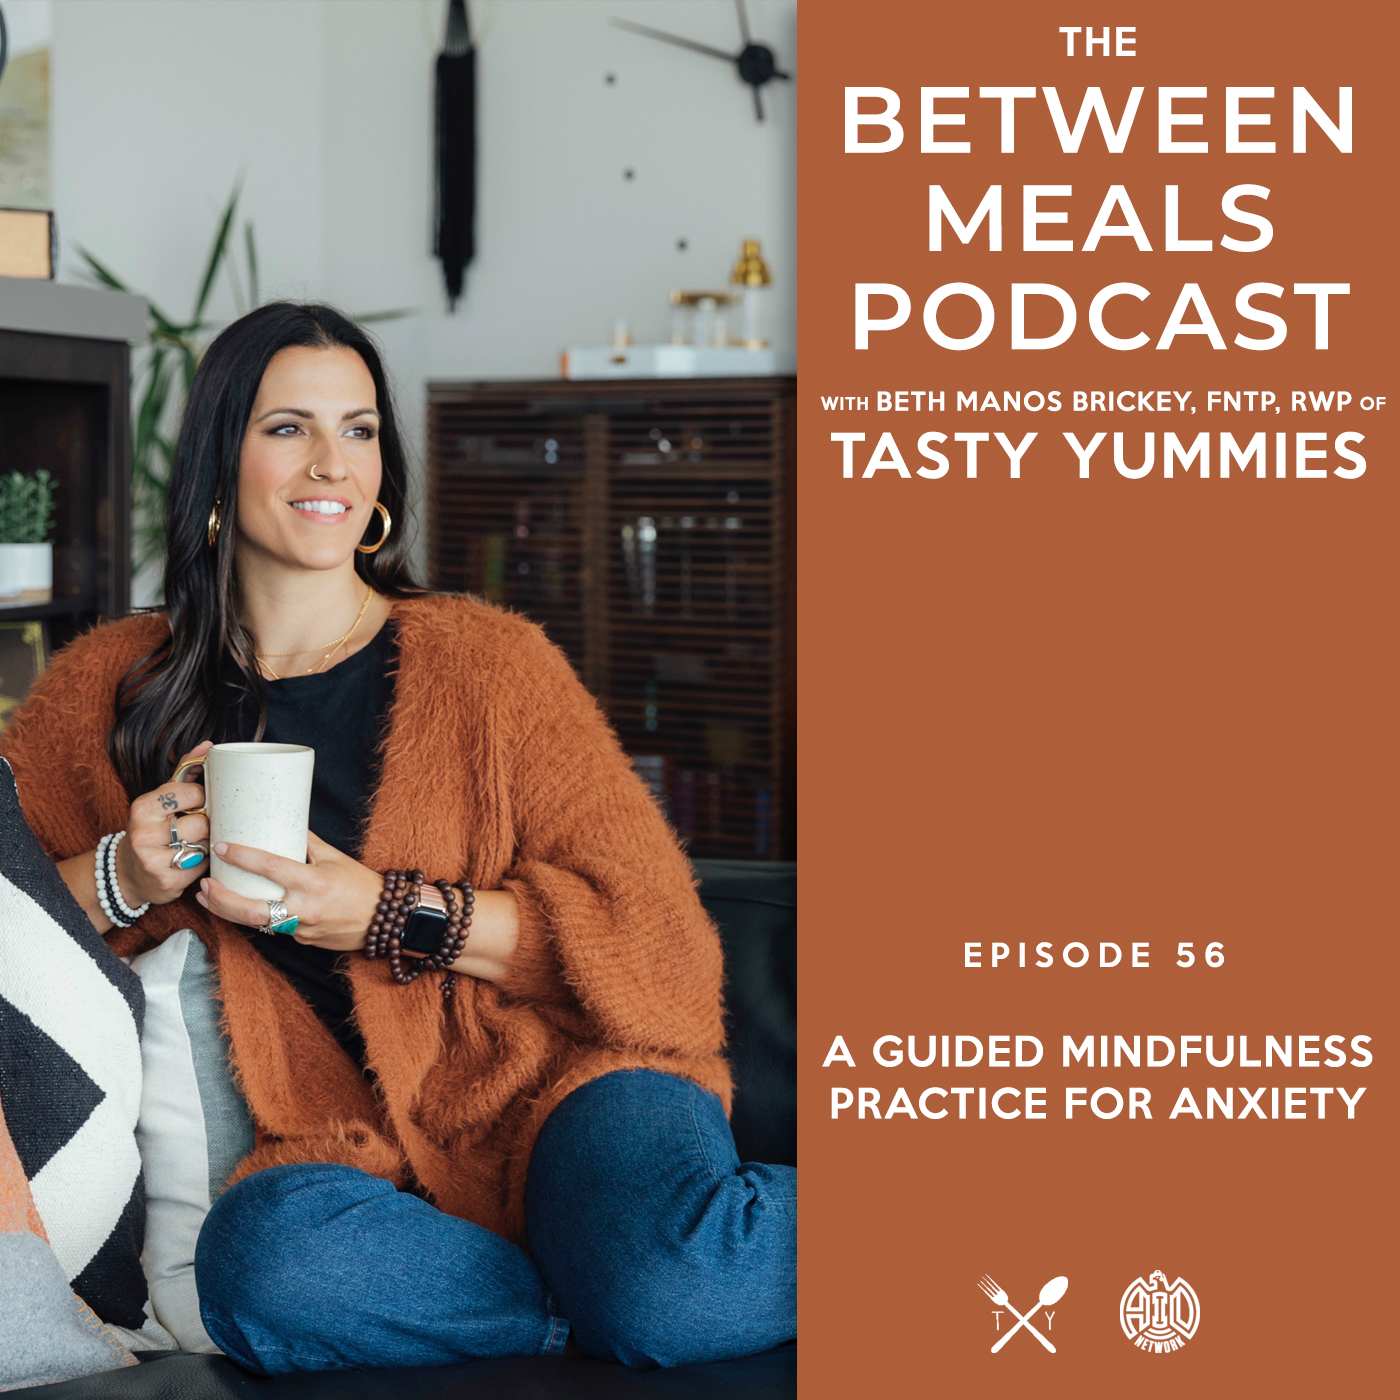 Between Meals Podcast. Episode 56: A Guided Mindfulness Practice for Anxiety